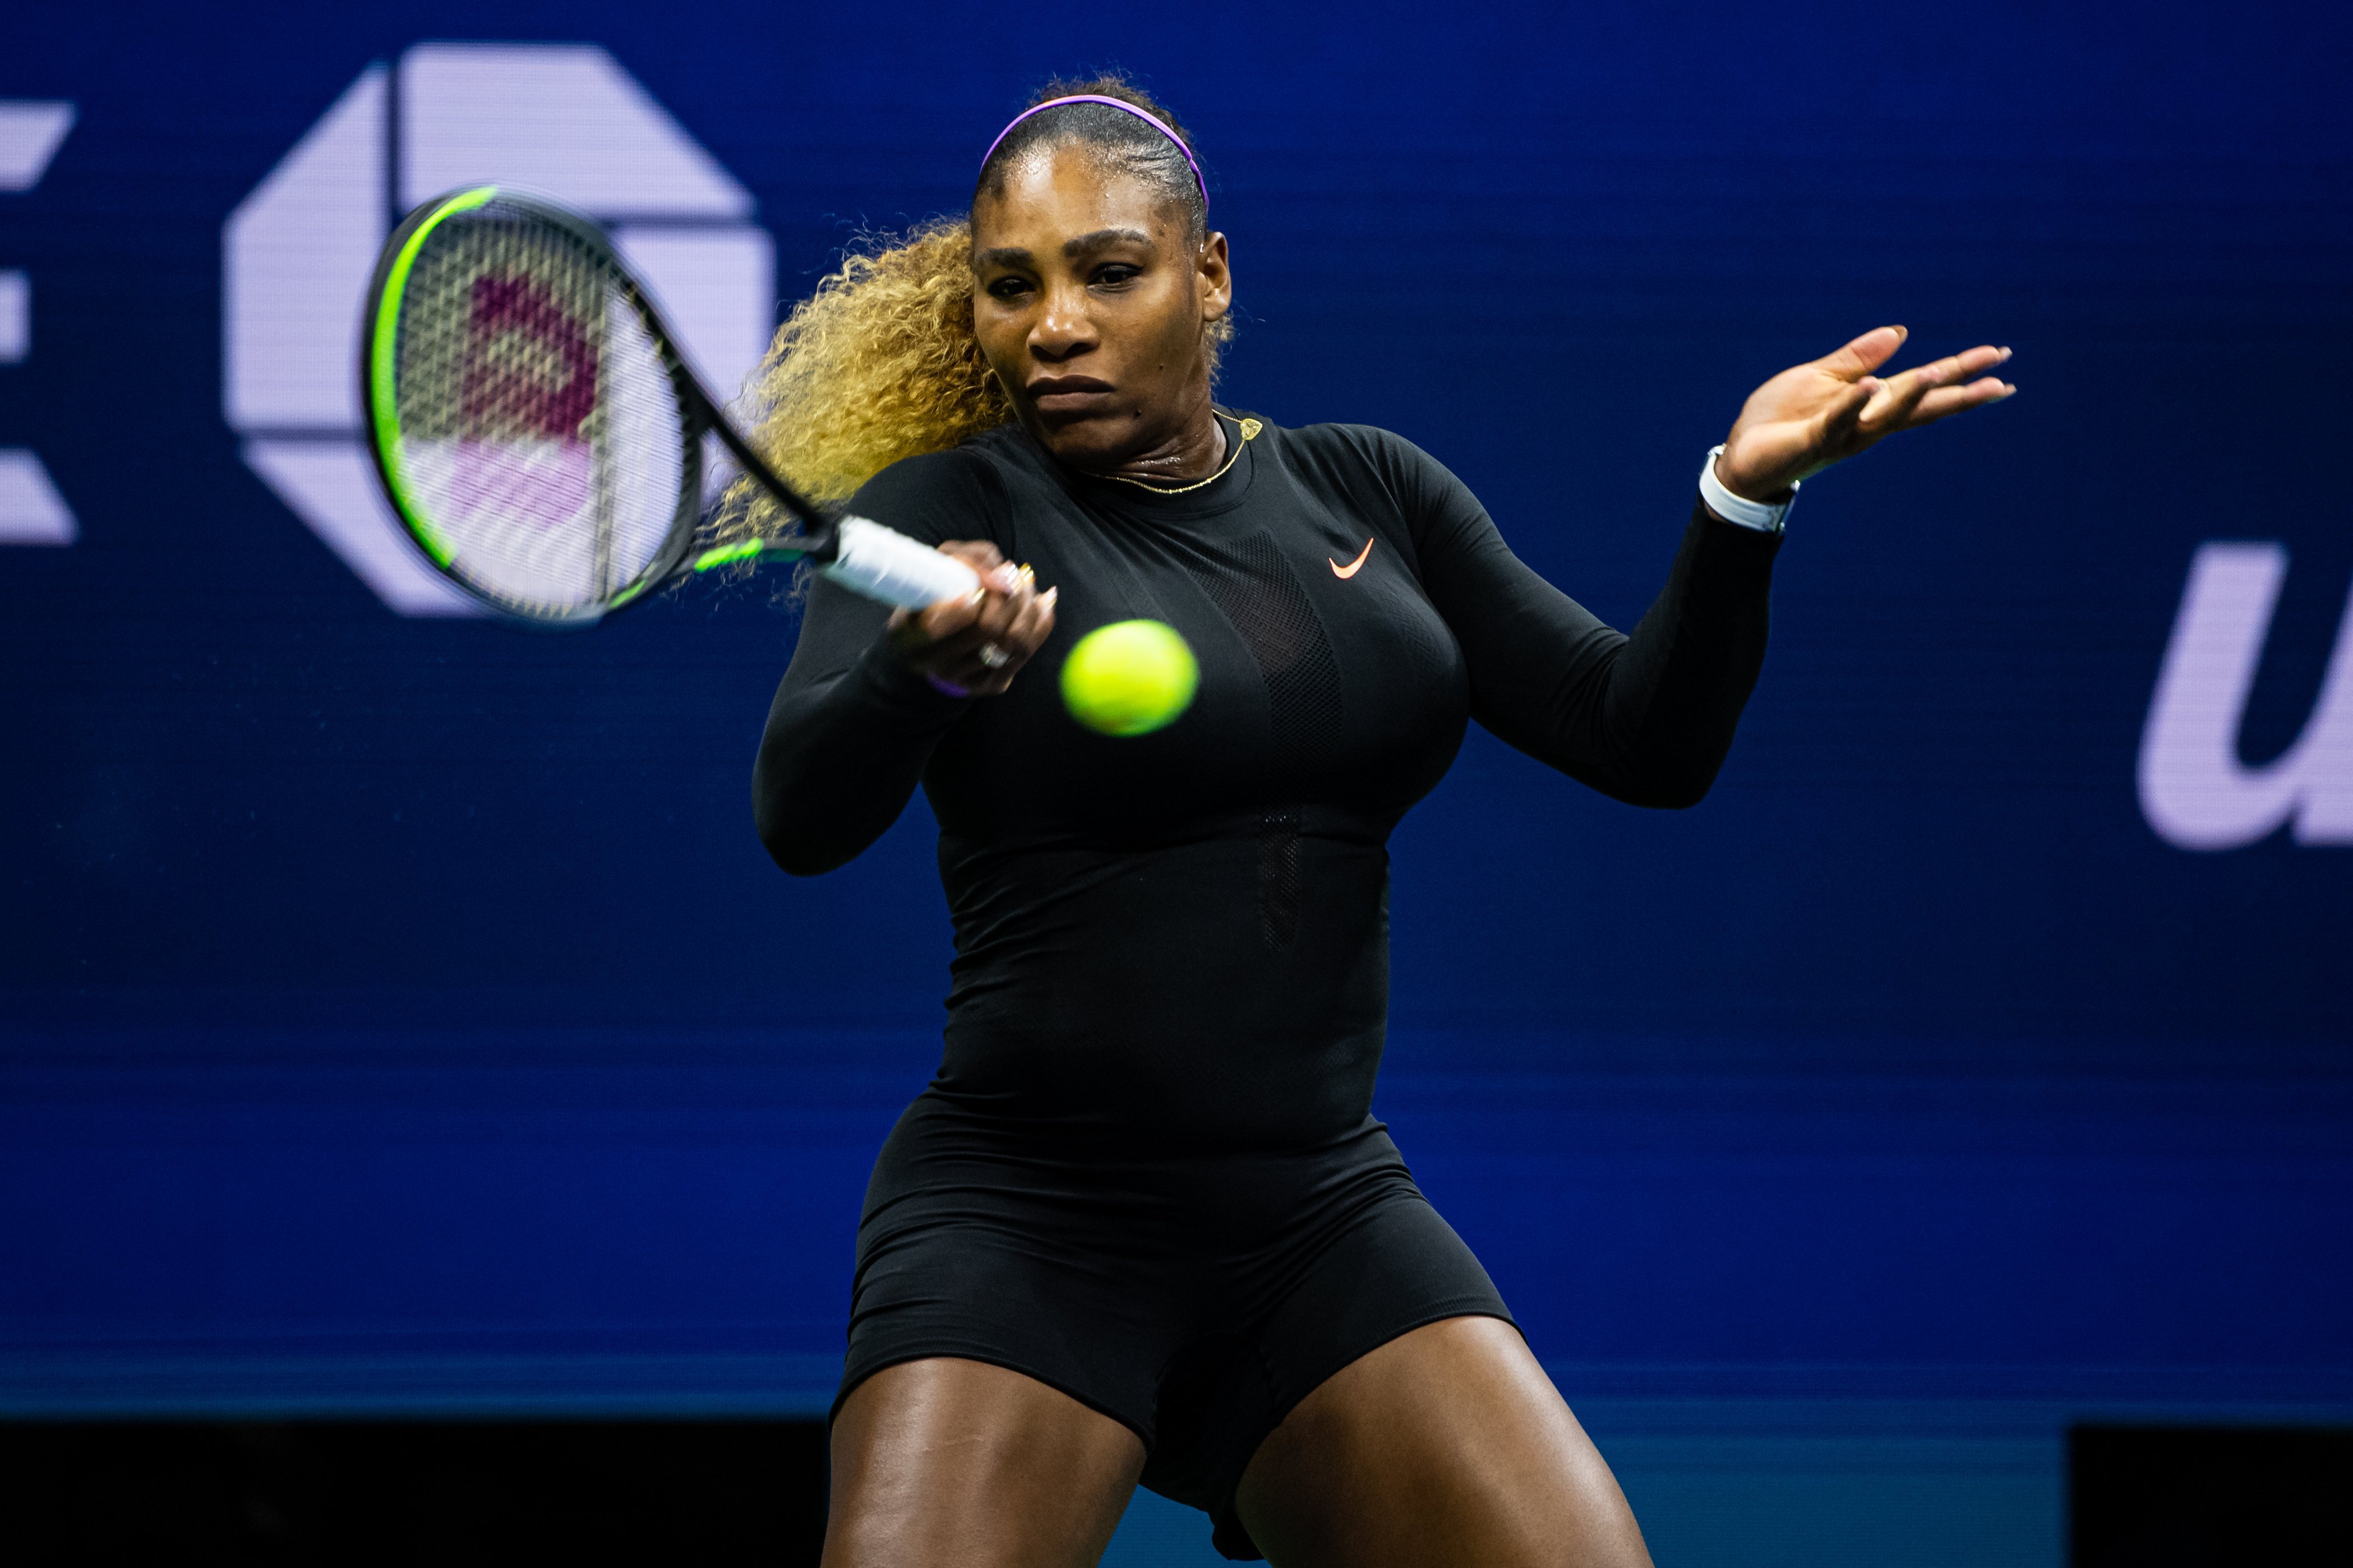 Serena Williams playing against Maria Sharapova in the first round of the US Open on Aug. 26, 2019 in New York City | Photo: Getty Images